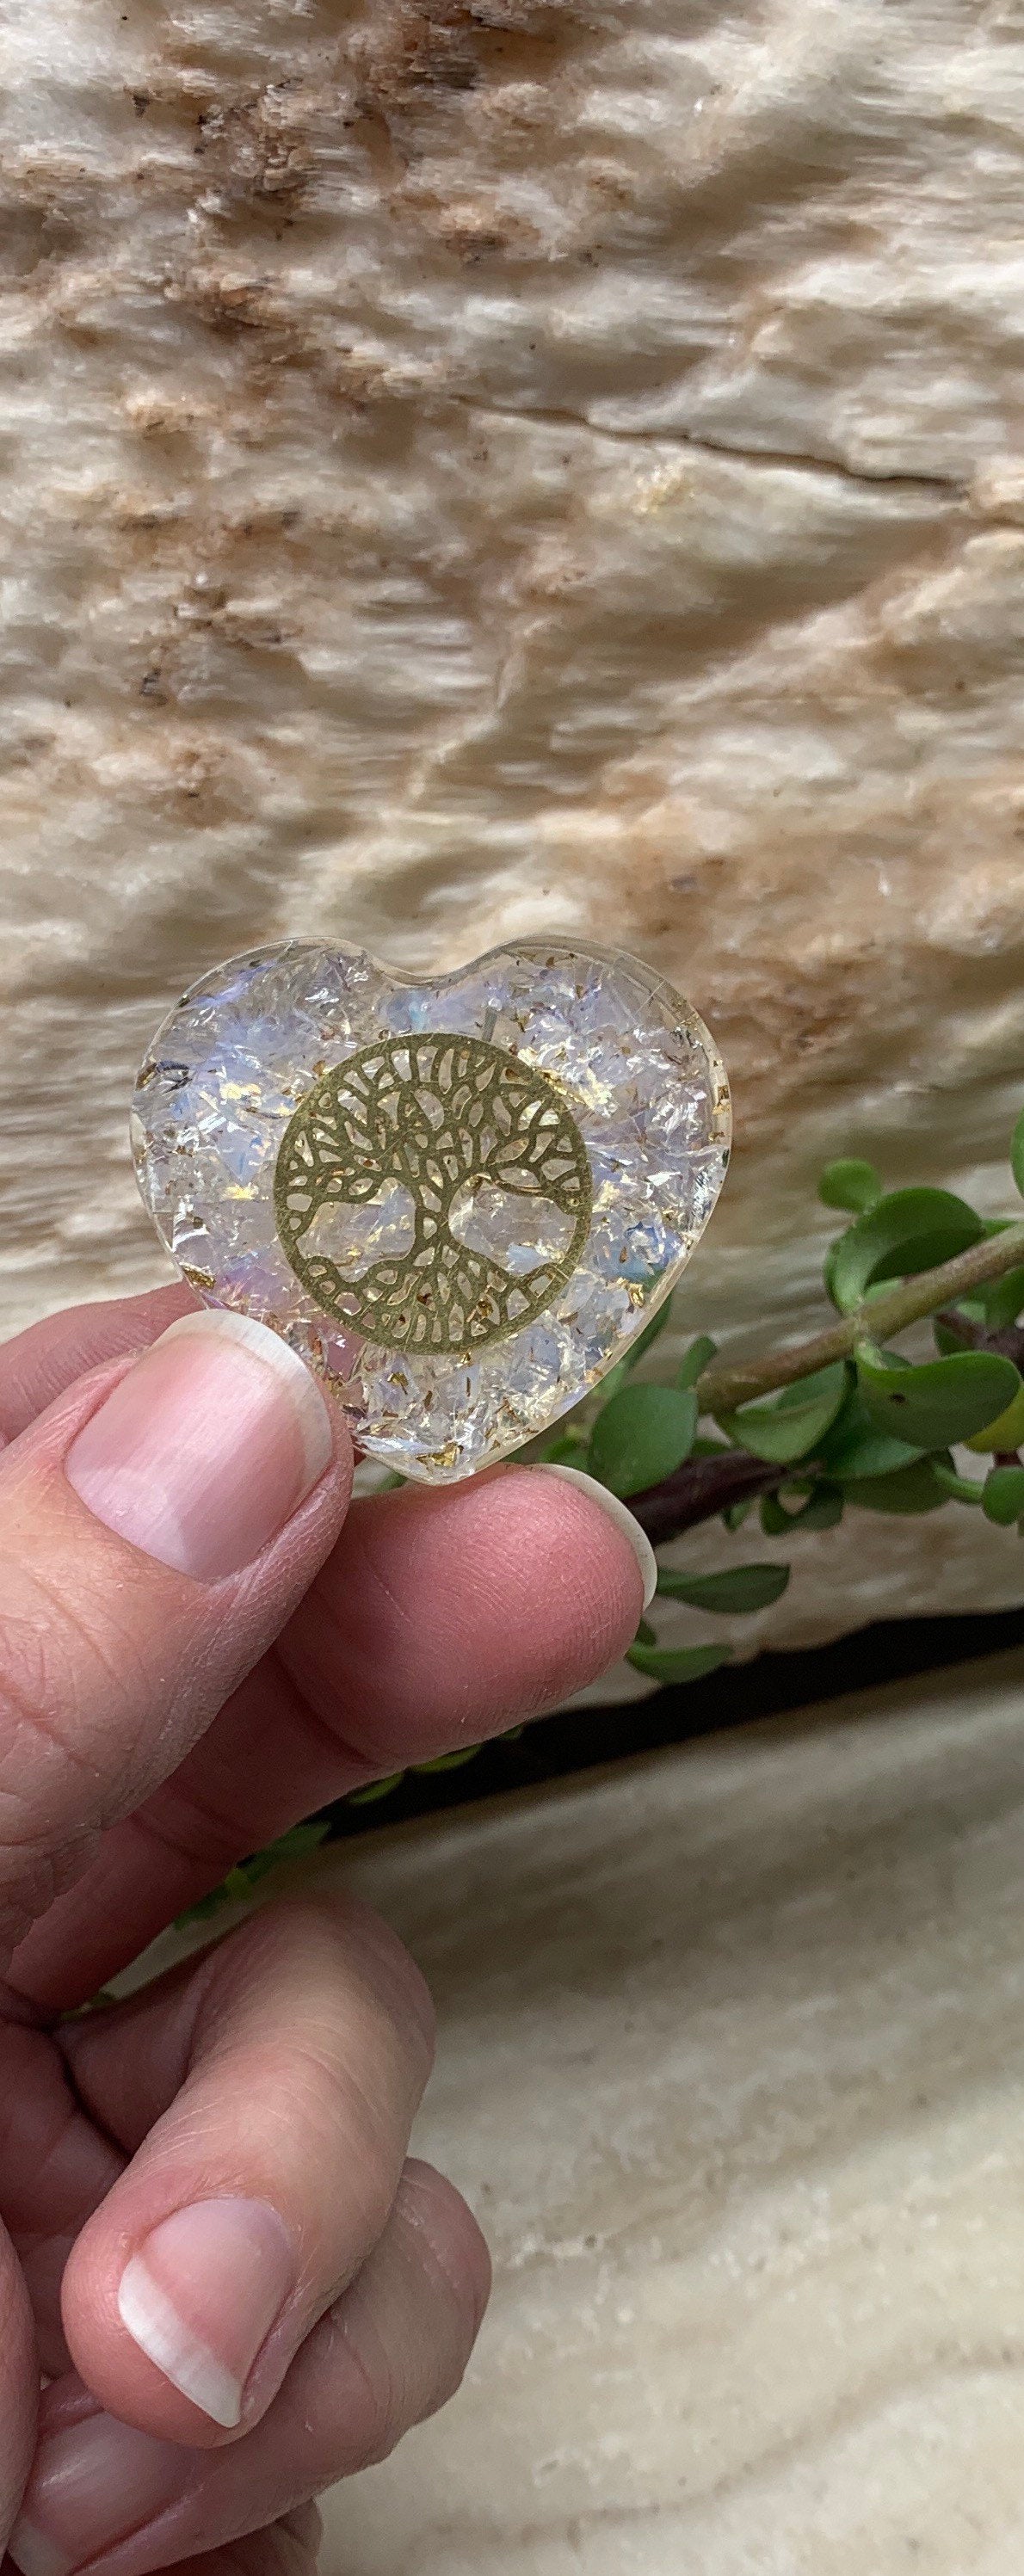 Opalite Organite Tree of Life 1 1/2” Heart 1590 (Crystals Imbedded in Resin)